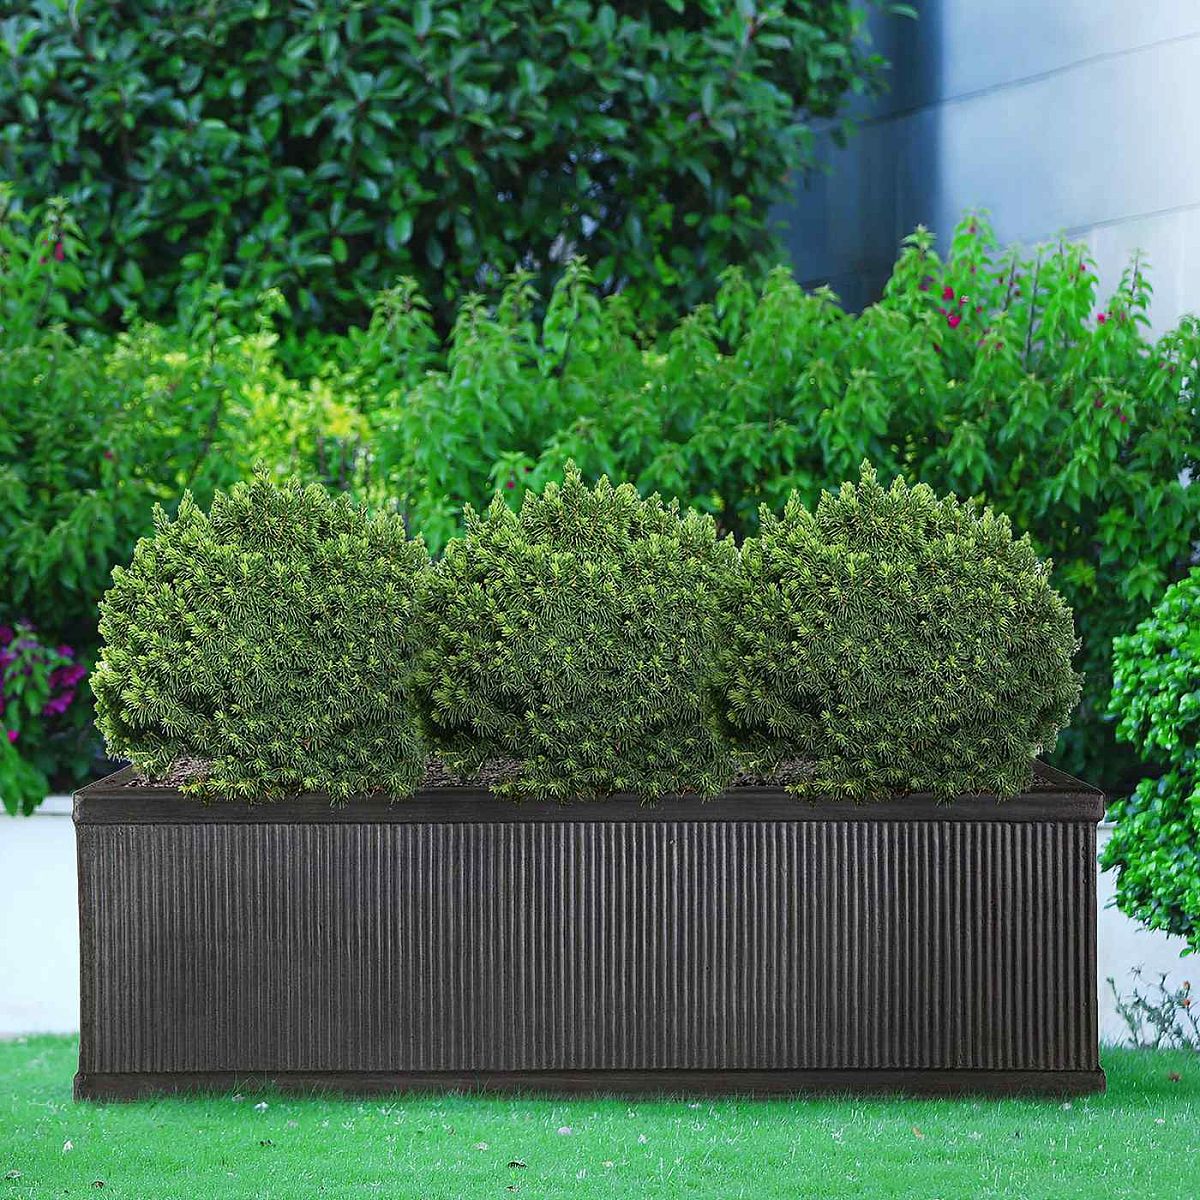 Vertical Ribbed Vintage Style Window Box by Idealist Lite